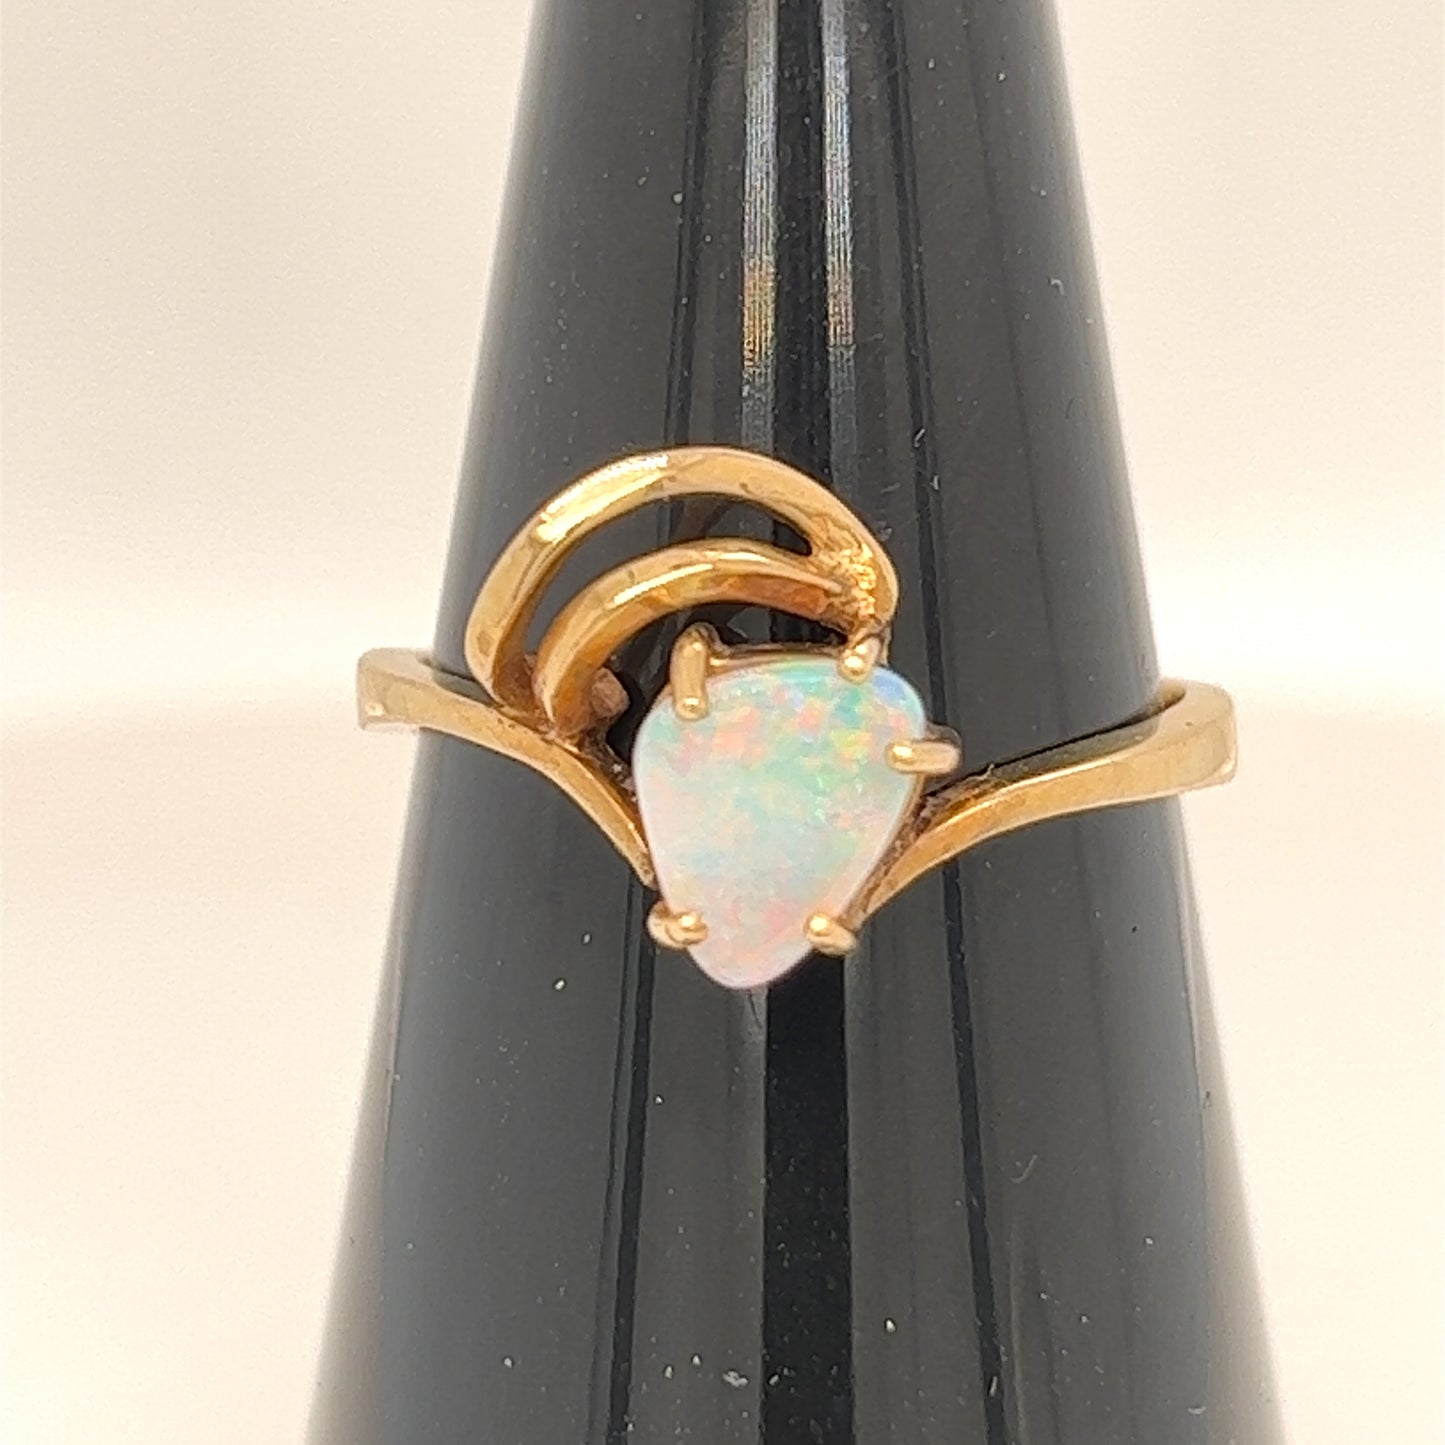 Lovely ring for any occasion. Bespoke made with nice little Coober Pedy opal with pink flashes. 14ct gold.